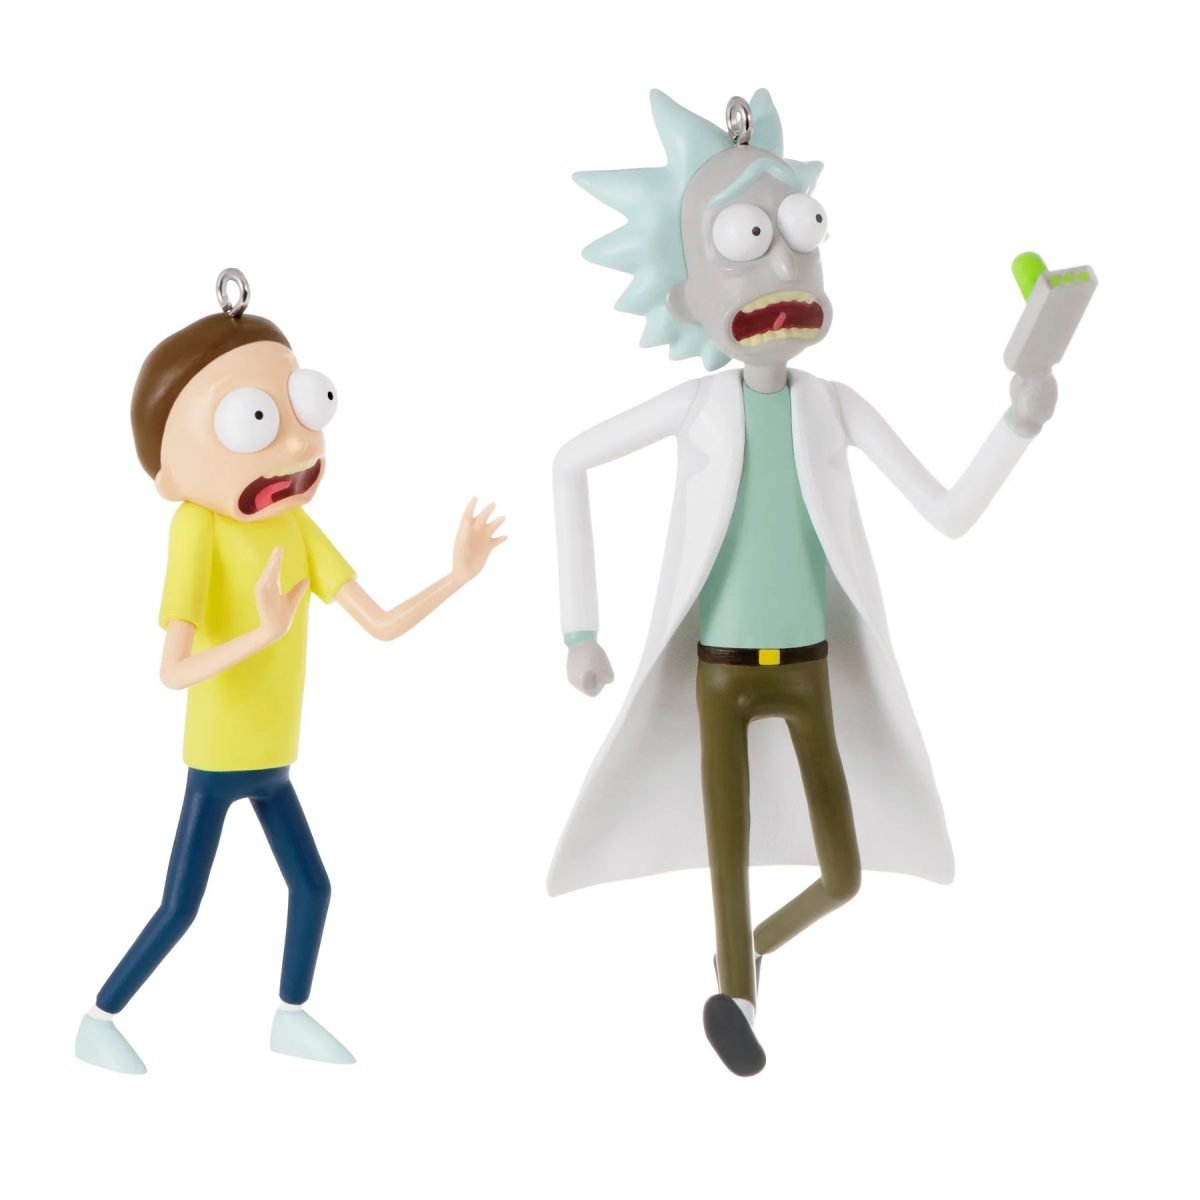 A Rick and Morty ouble ornament set with them running and screaming